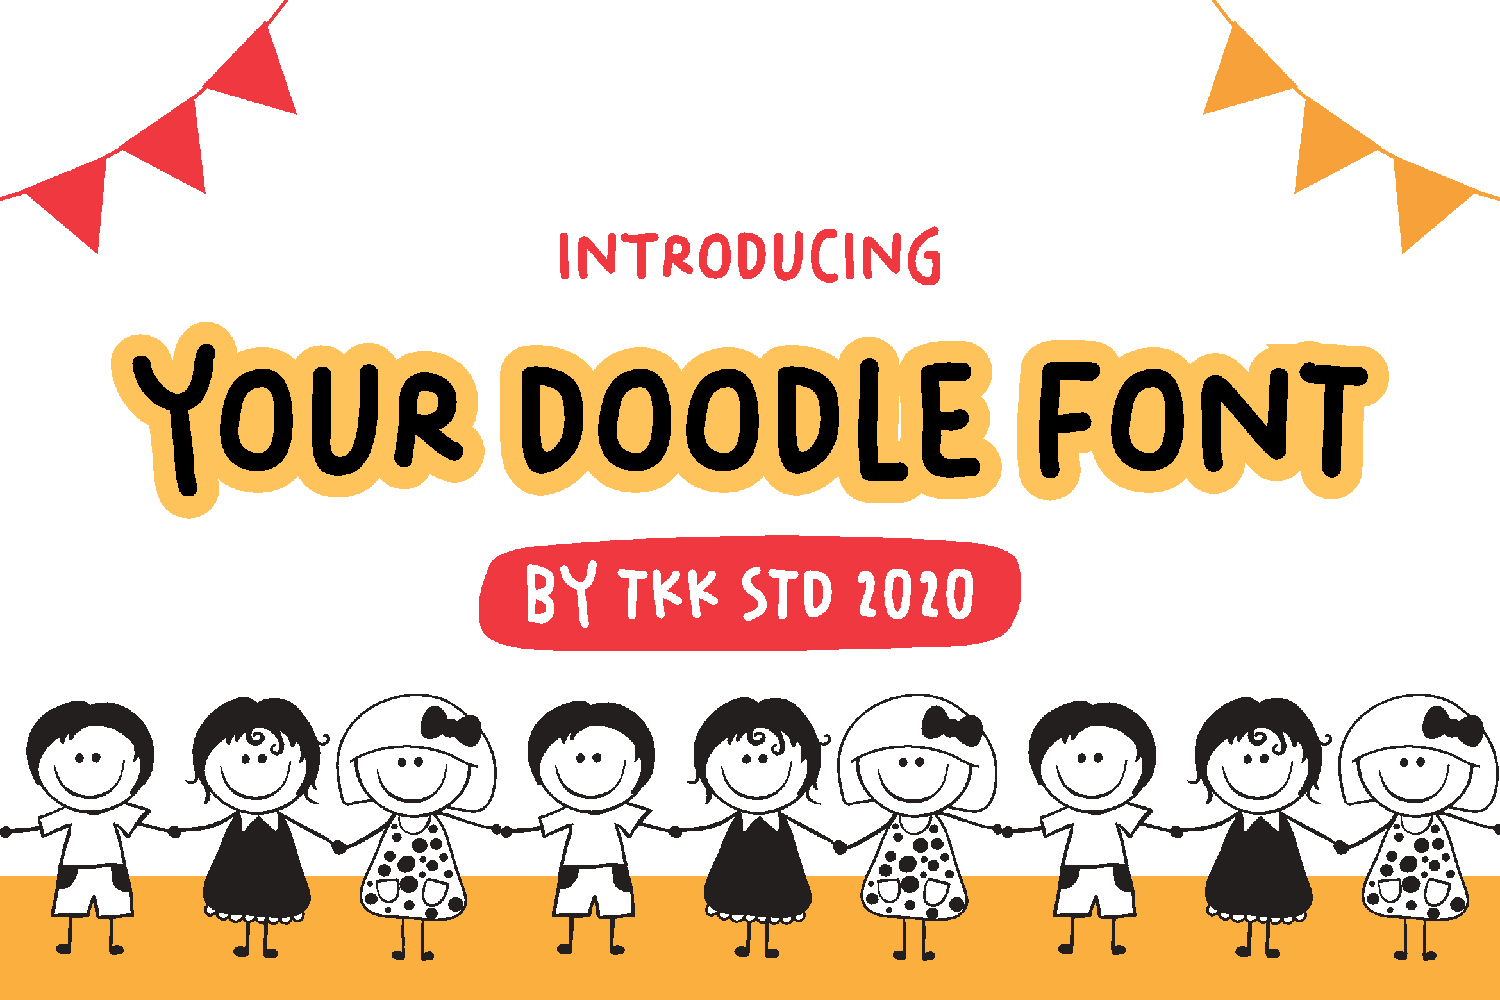 Your Doodle Free Font